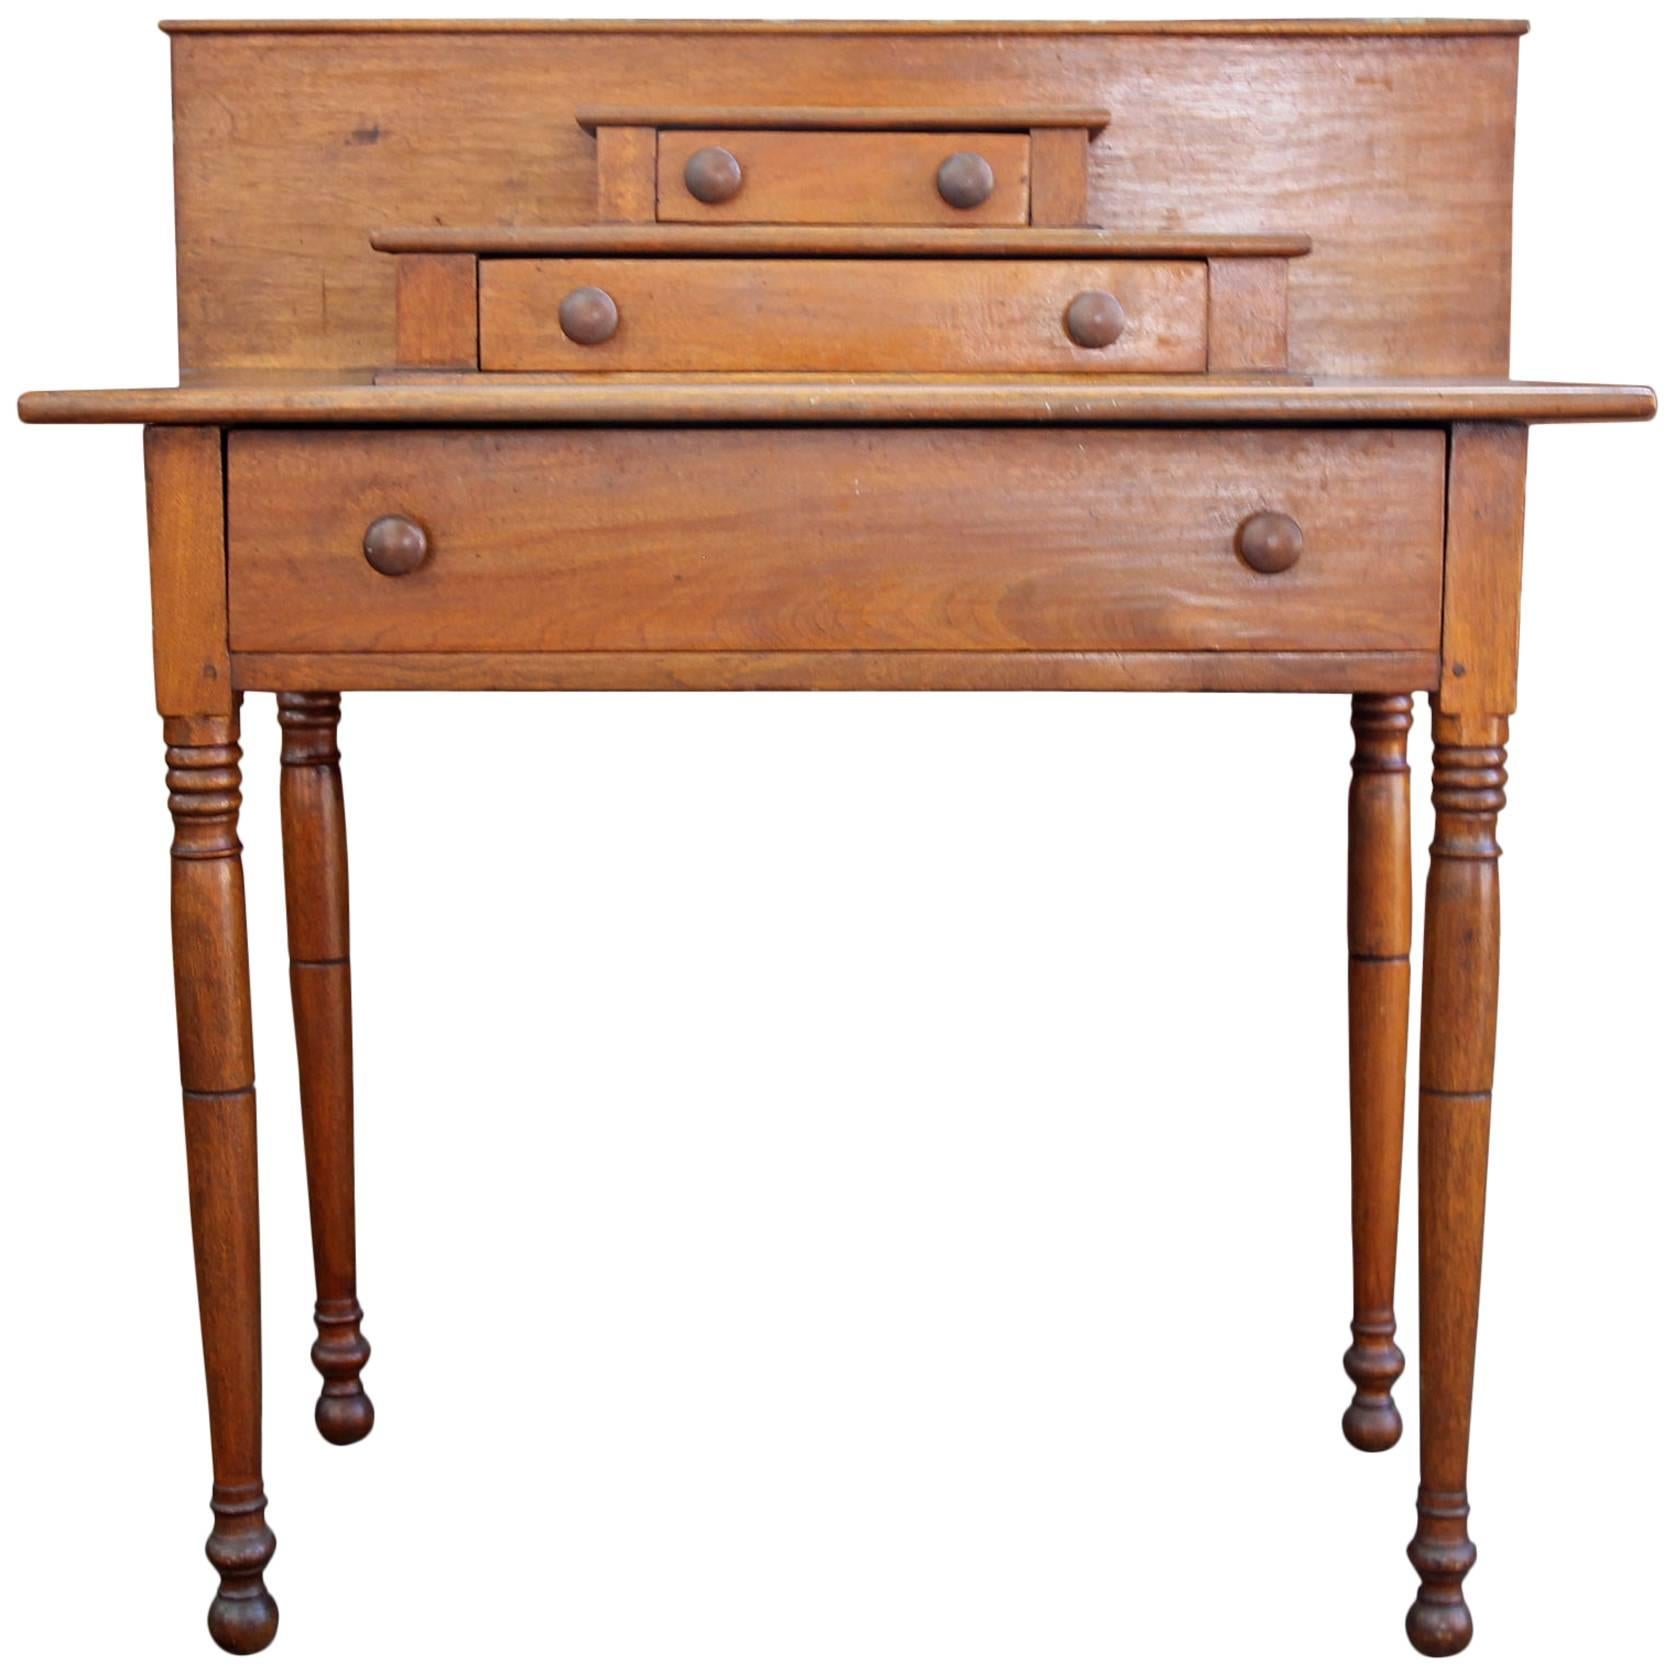 New England Walnut Side Table with Strong Square Backsplash, circa 1830